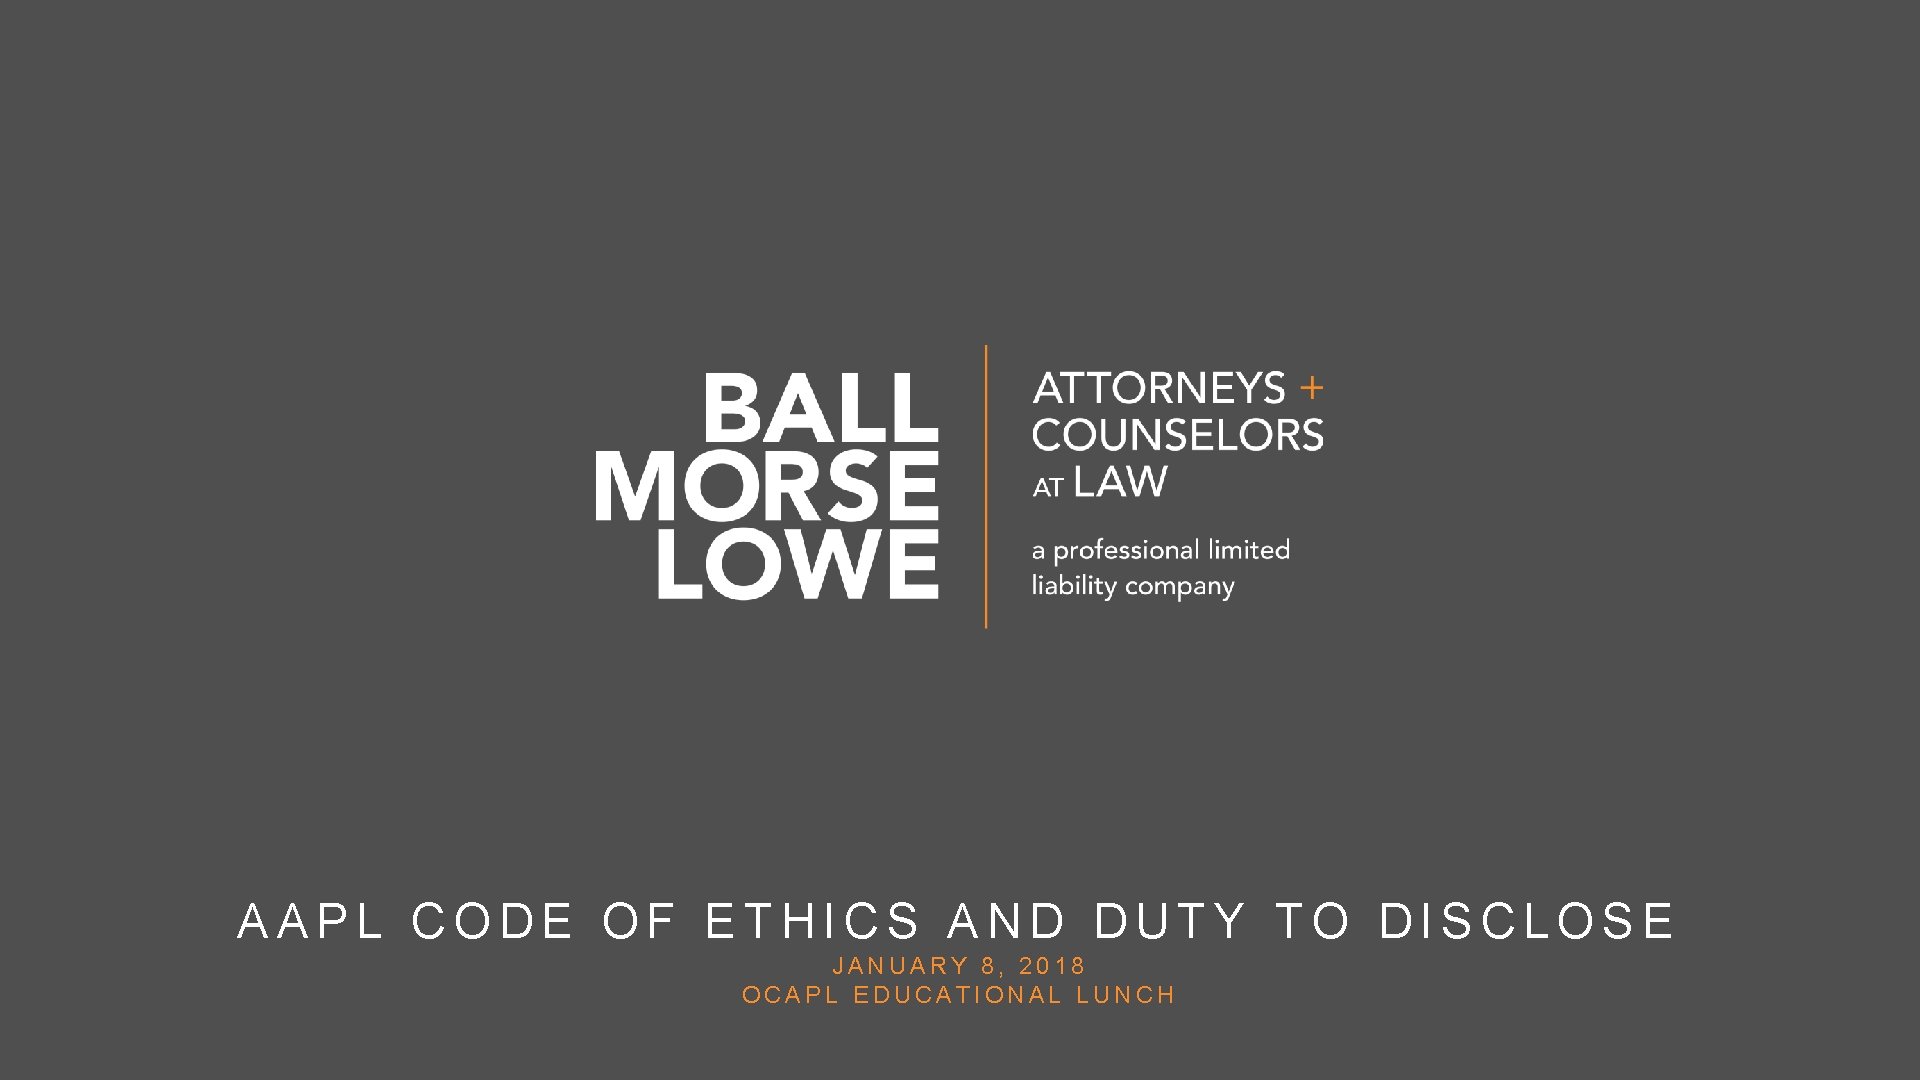 AAPL CODE OF ETHICS AND DUTY TO DISCLOSE JANUARY 8, 2018 OCAPL EDUCATIONAL LUNCH